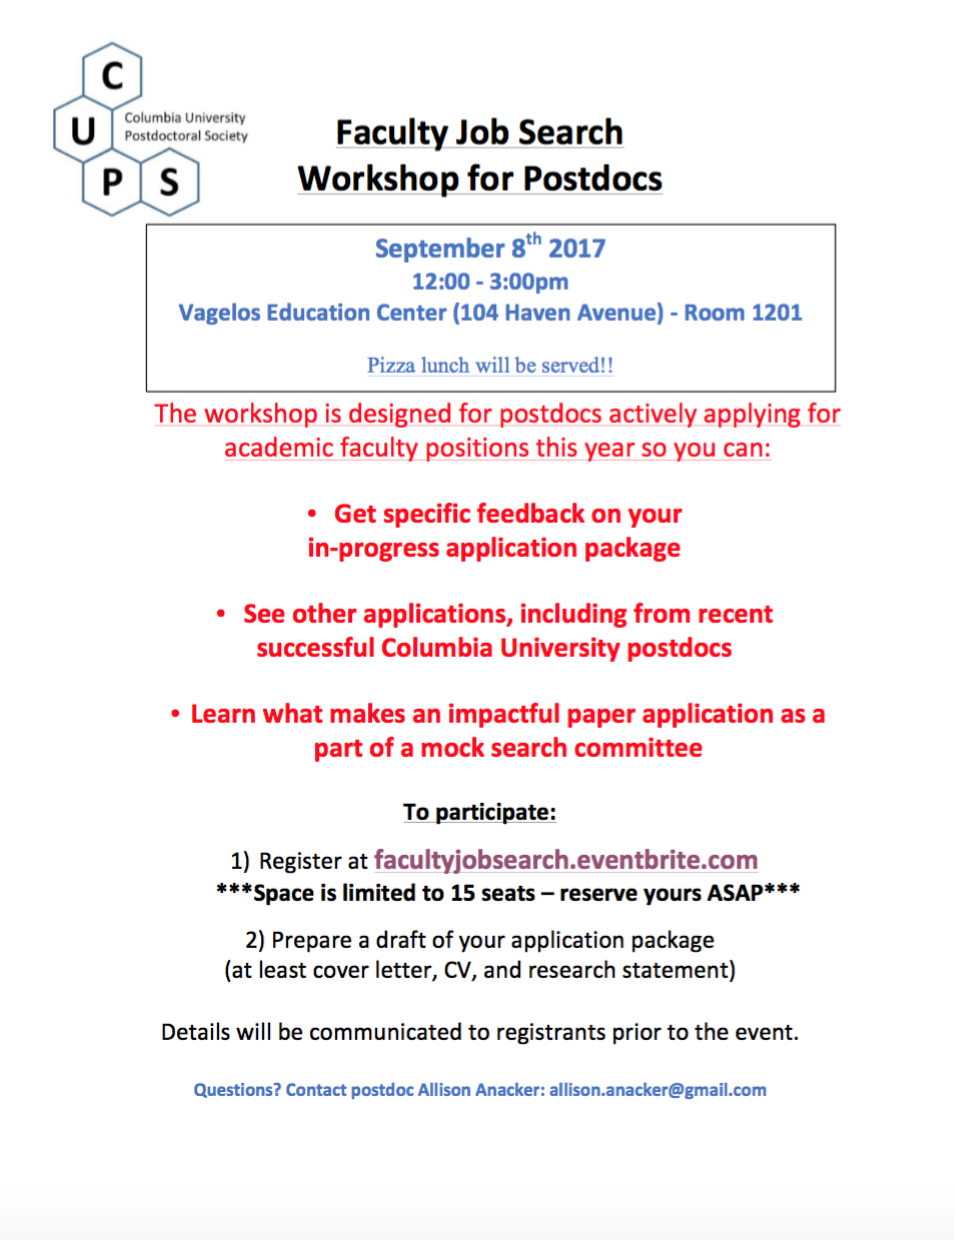 Faculty job search workshop for postdocs at Columbia University